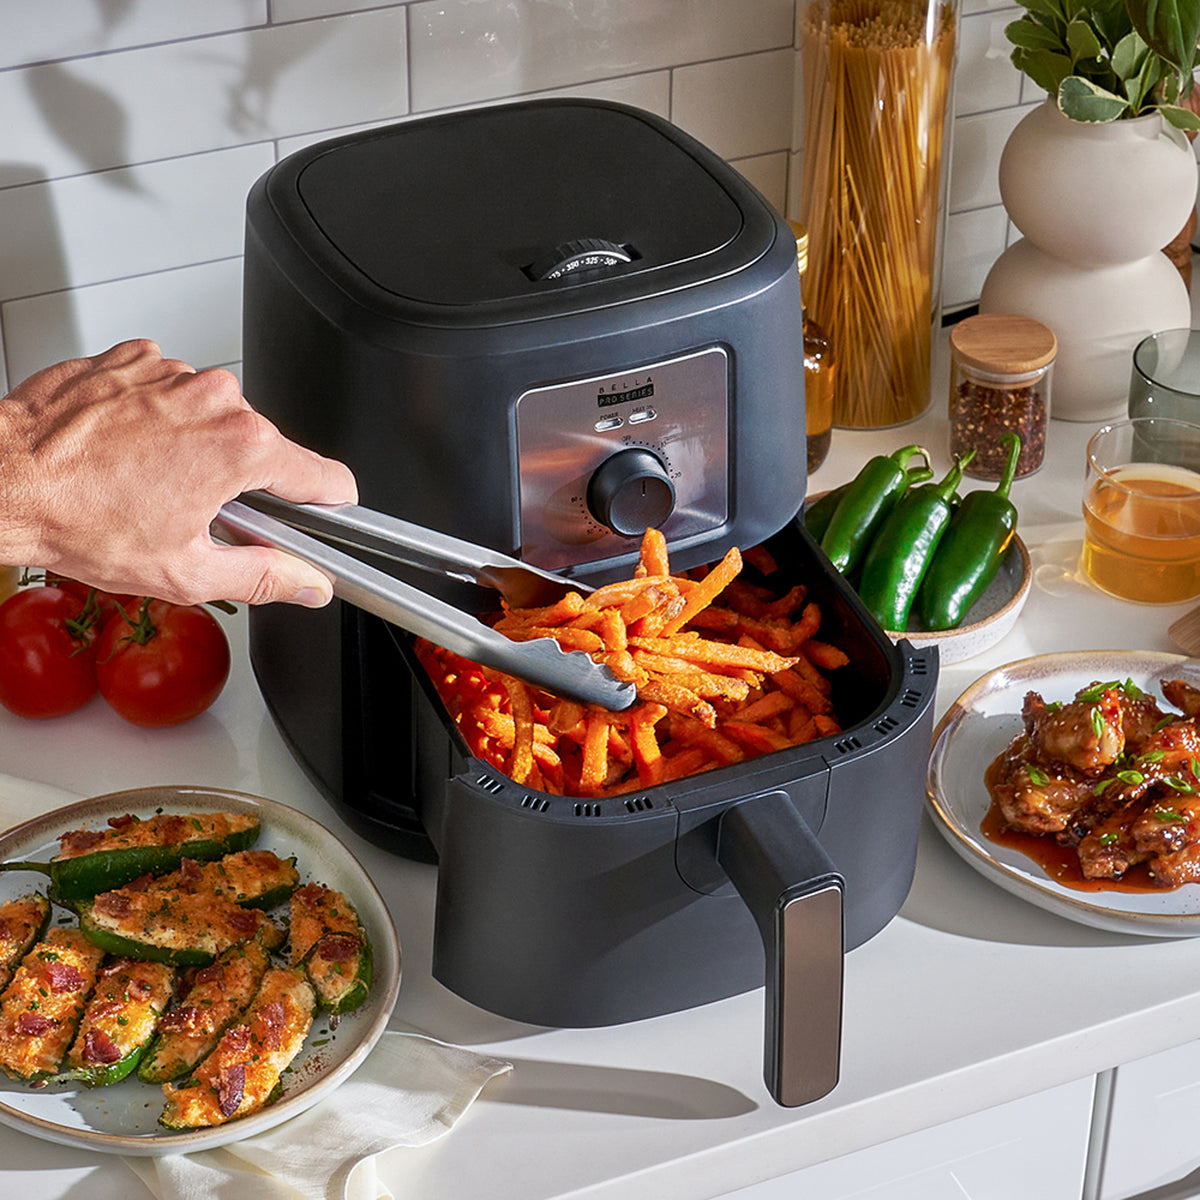 Rent to own Bella Pro Series - 4.2-qt. Manual Air Fryer with Matte